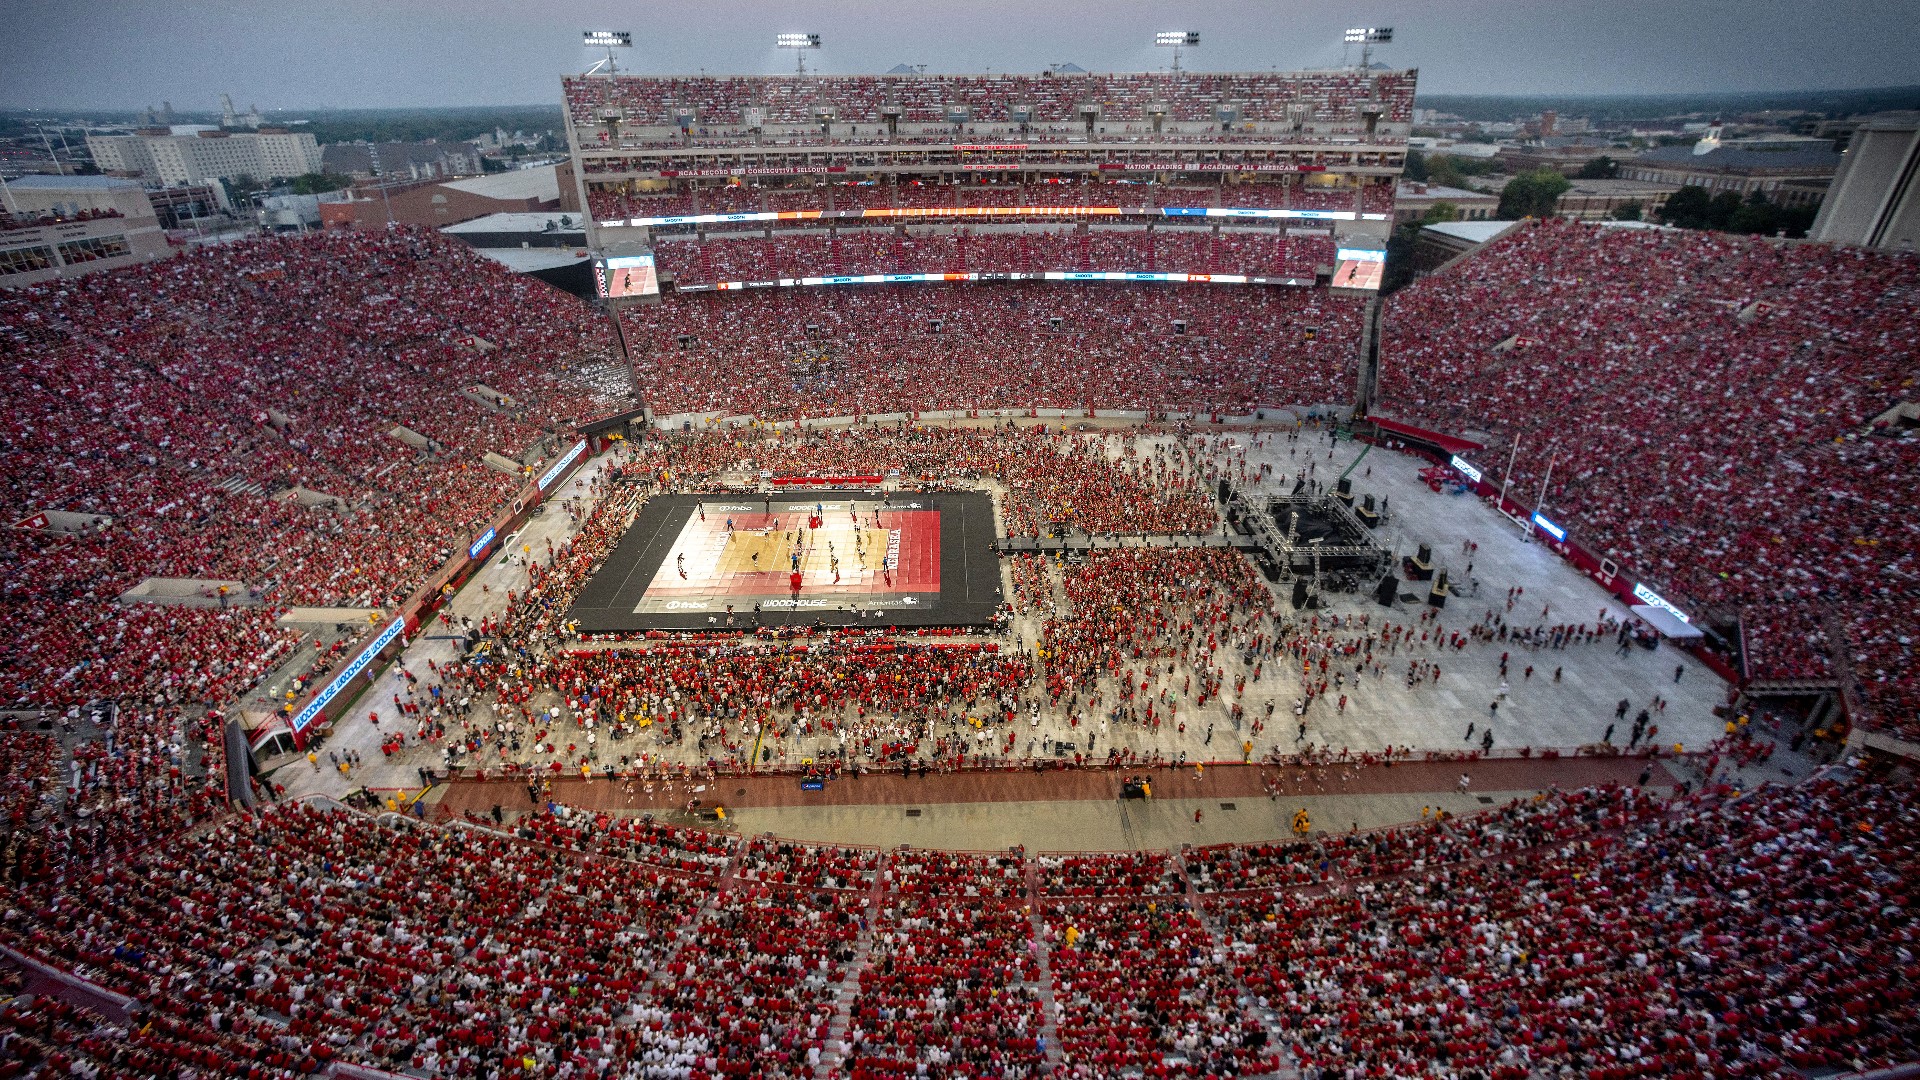 The Cornhuskers laid claim to the world record for largest attendance at a women's sporting event with 92,003 filling Memorial Stadium for their volleyball match.